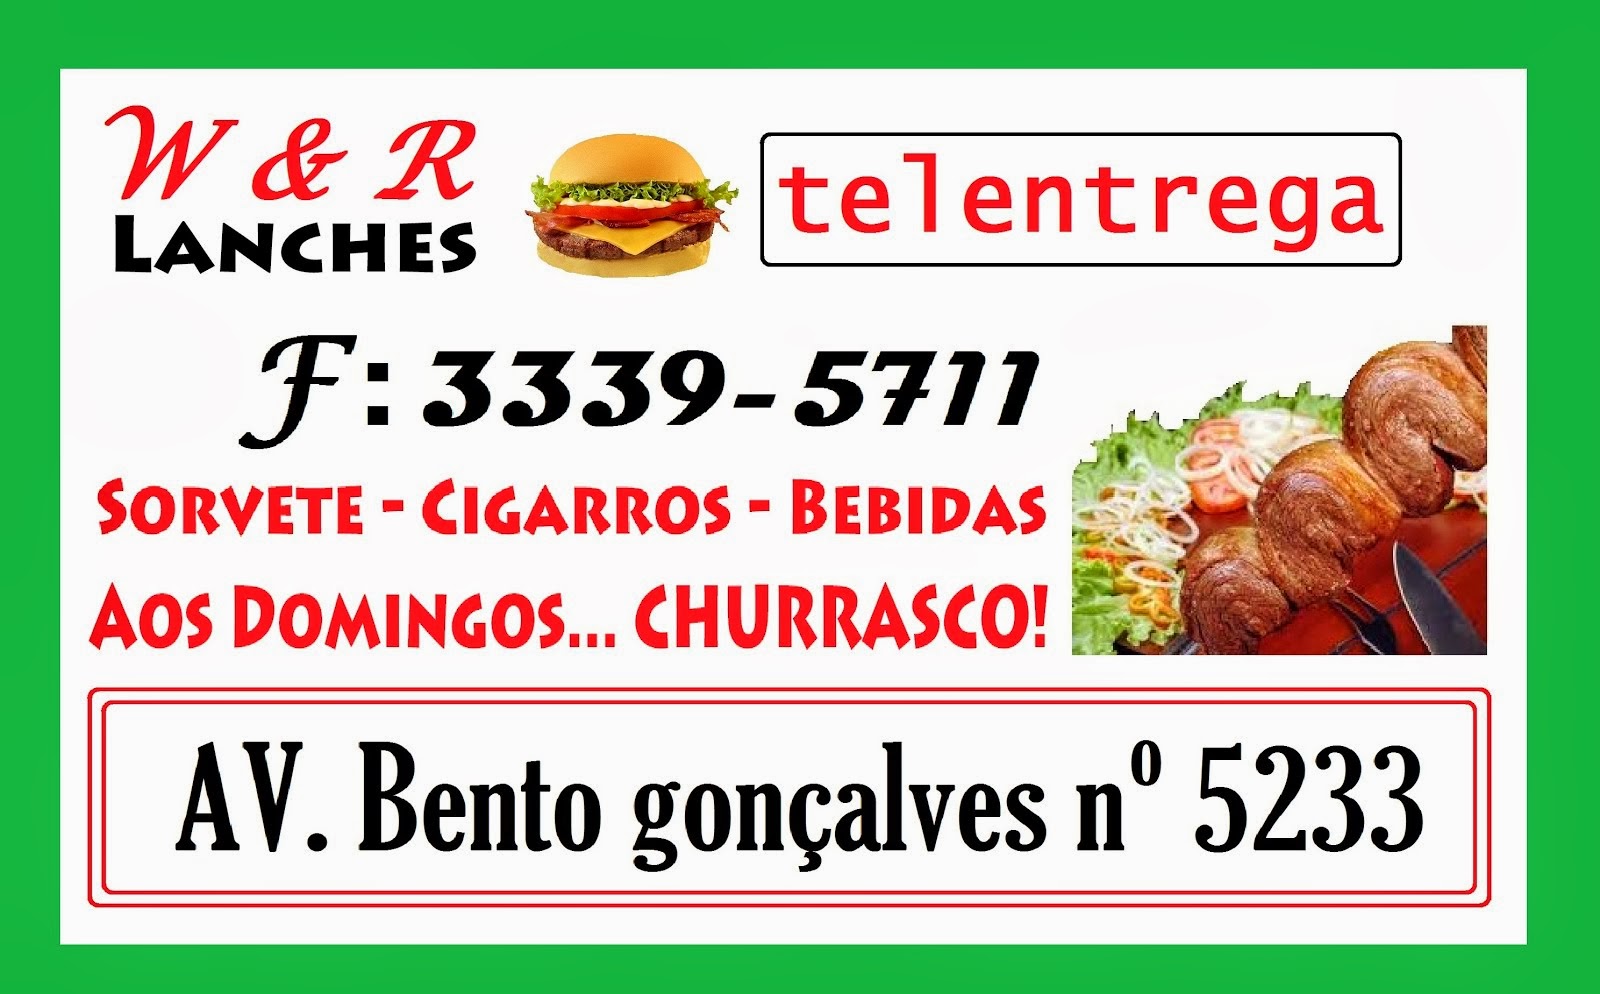 W & R Lanches